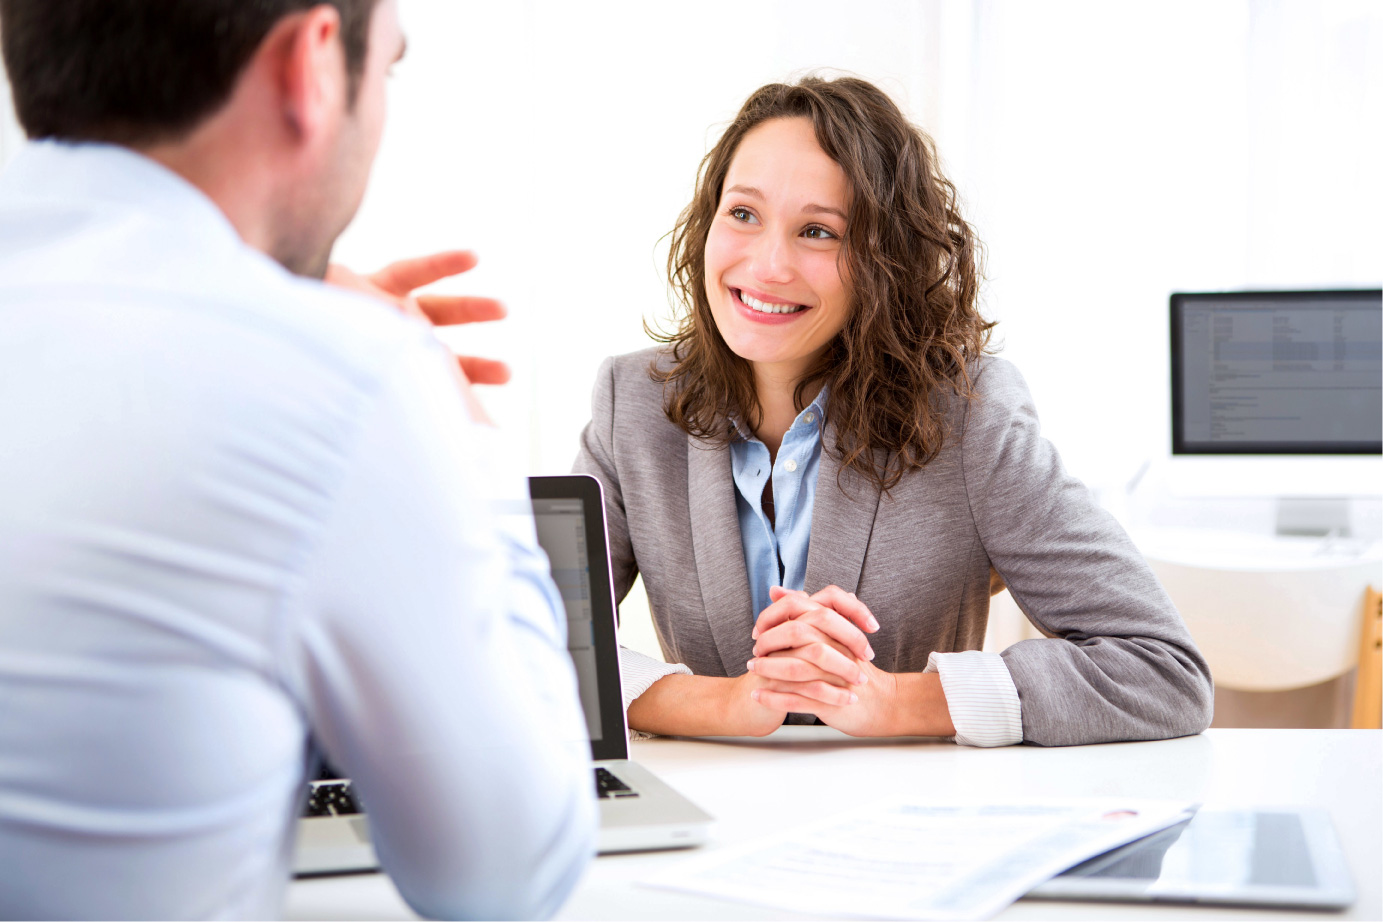 Avoiding the Cost of a Bad Hire through Strategic Interviews